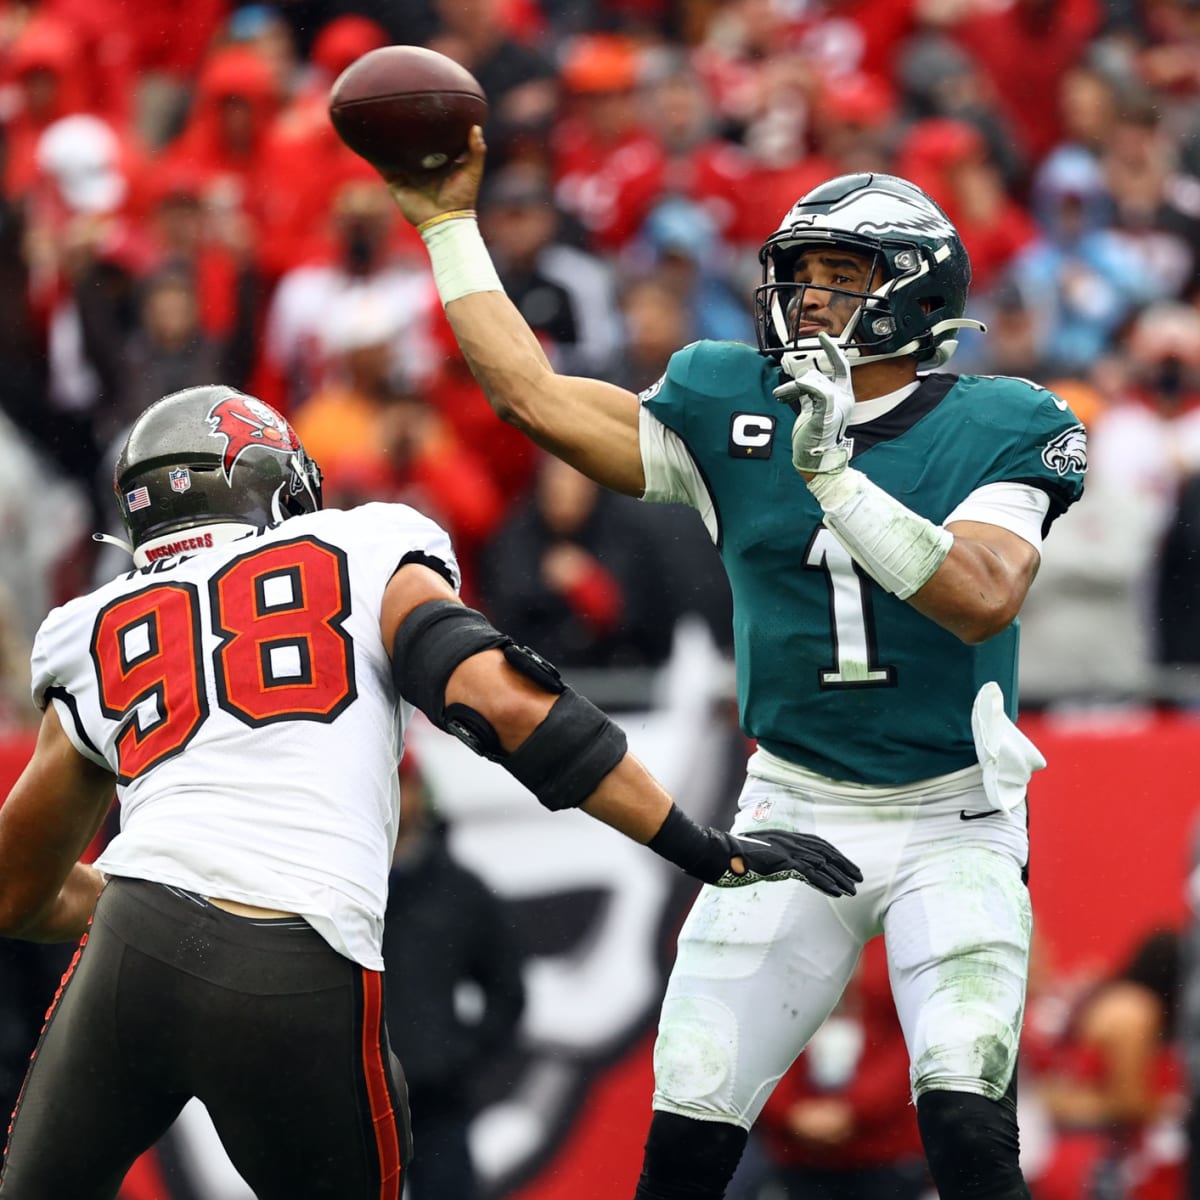 Eagles vs. Bucs: 6 important stats to know for wild card matchup